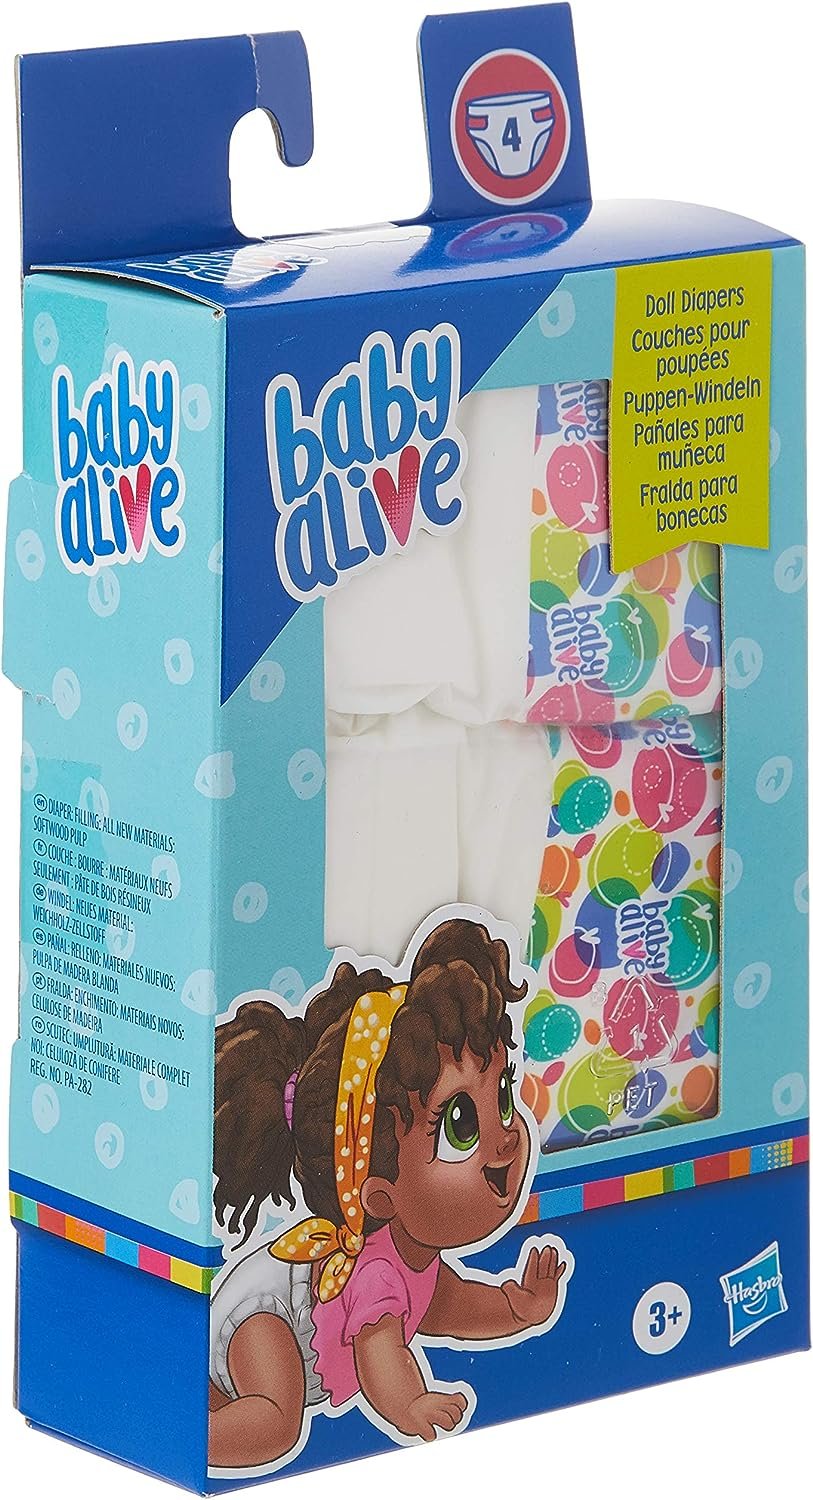 Baby Alive Doll Diaper Refill, Includes 4 Diapers, Toys Accessories, for Kids Ages 3 Years Old and Up